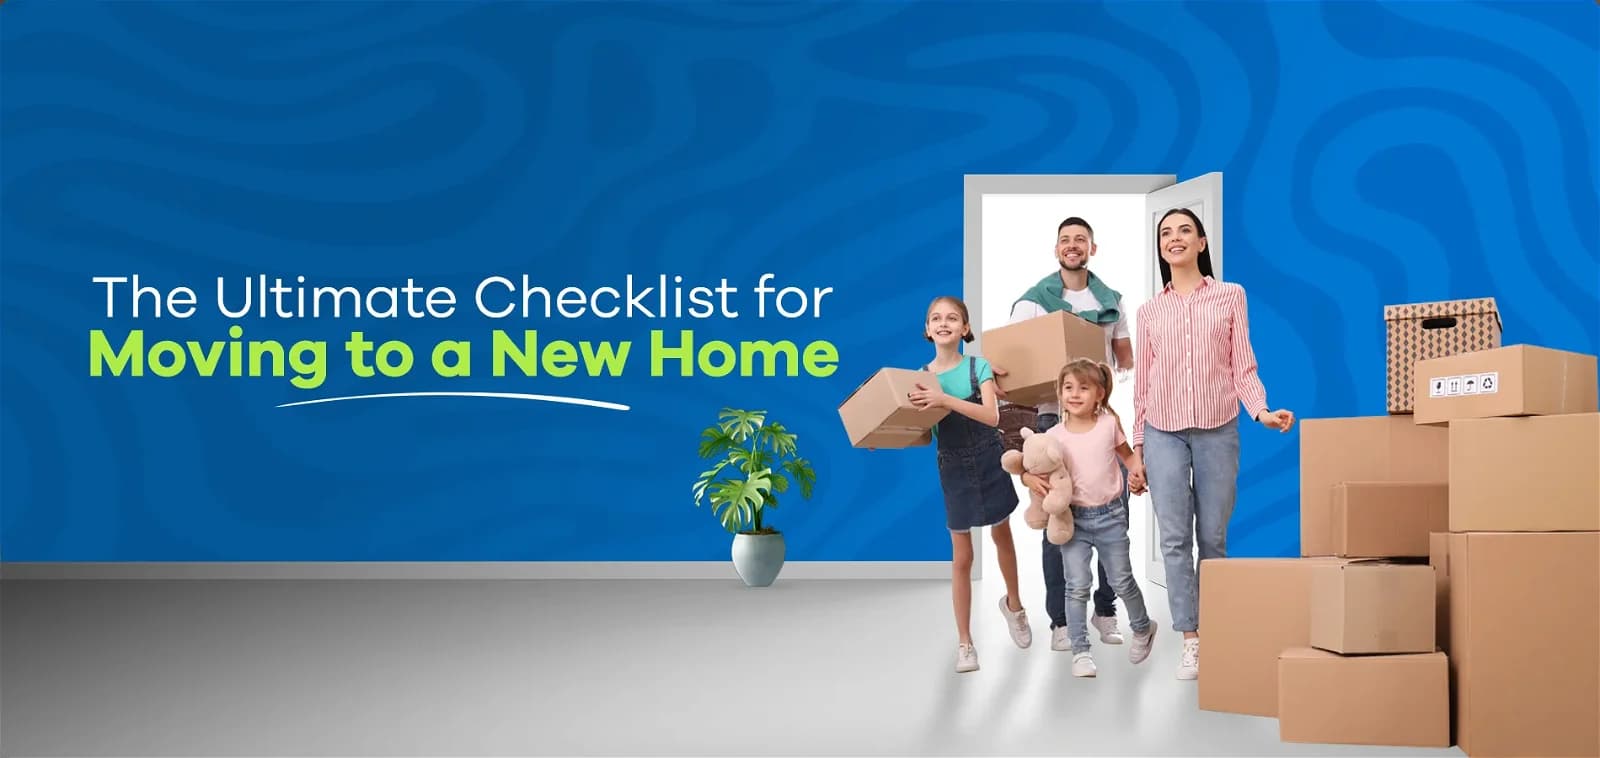 The Ultimate Checklist for Moving to a New Home